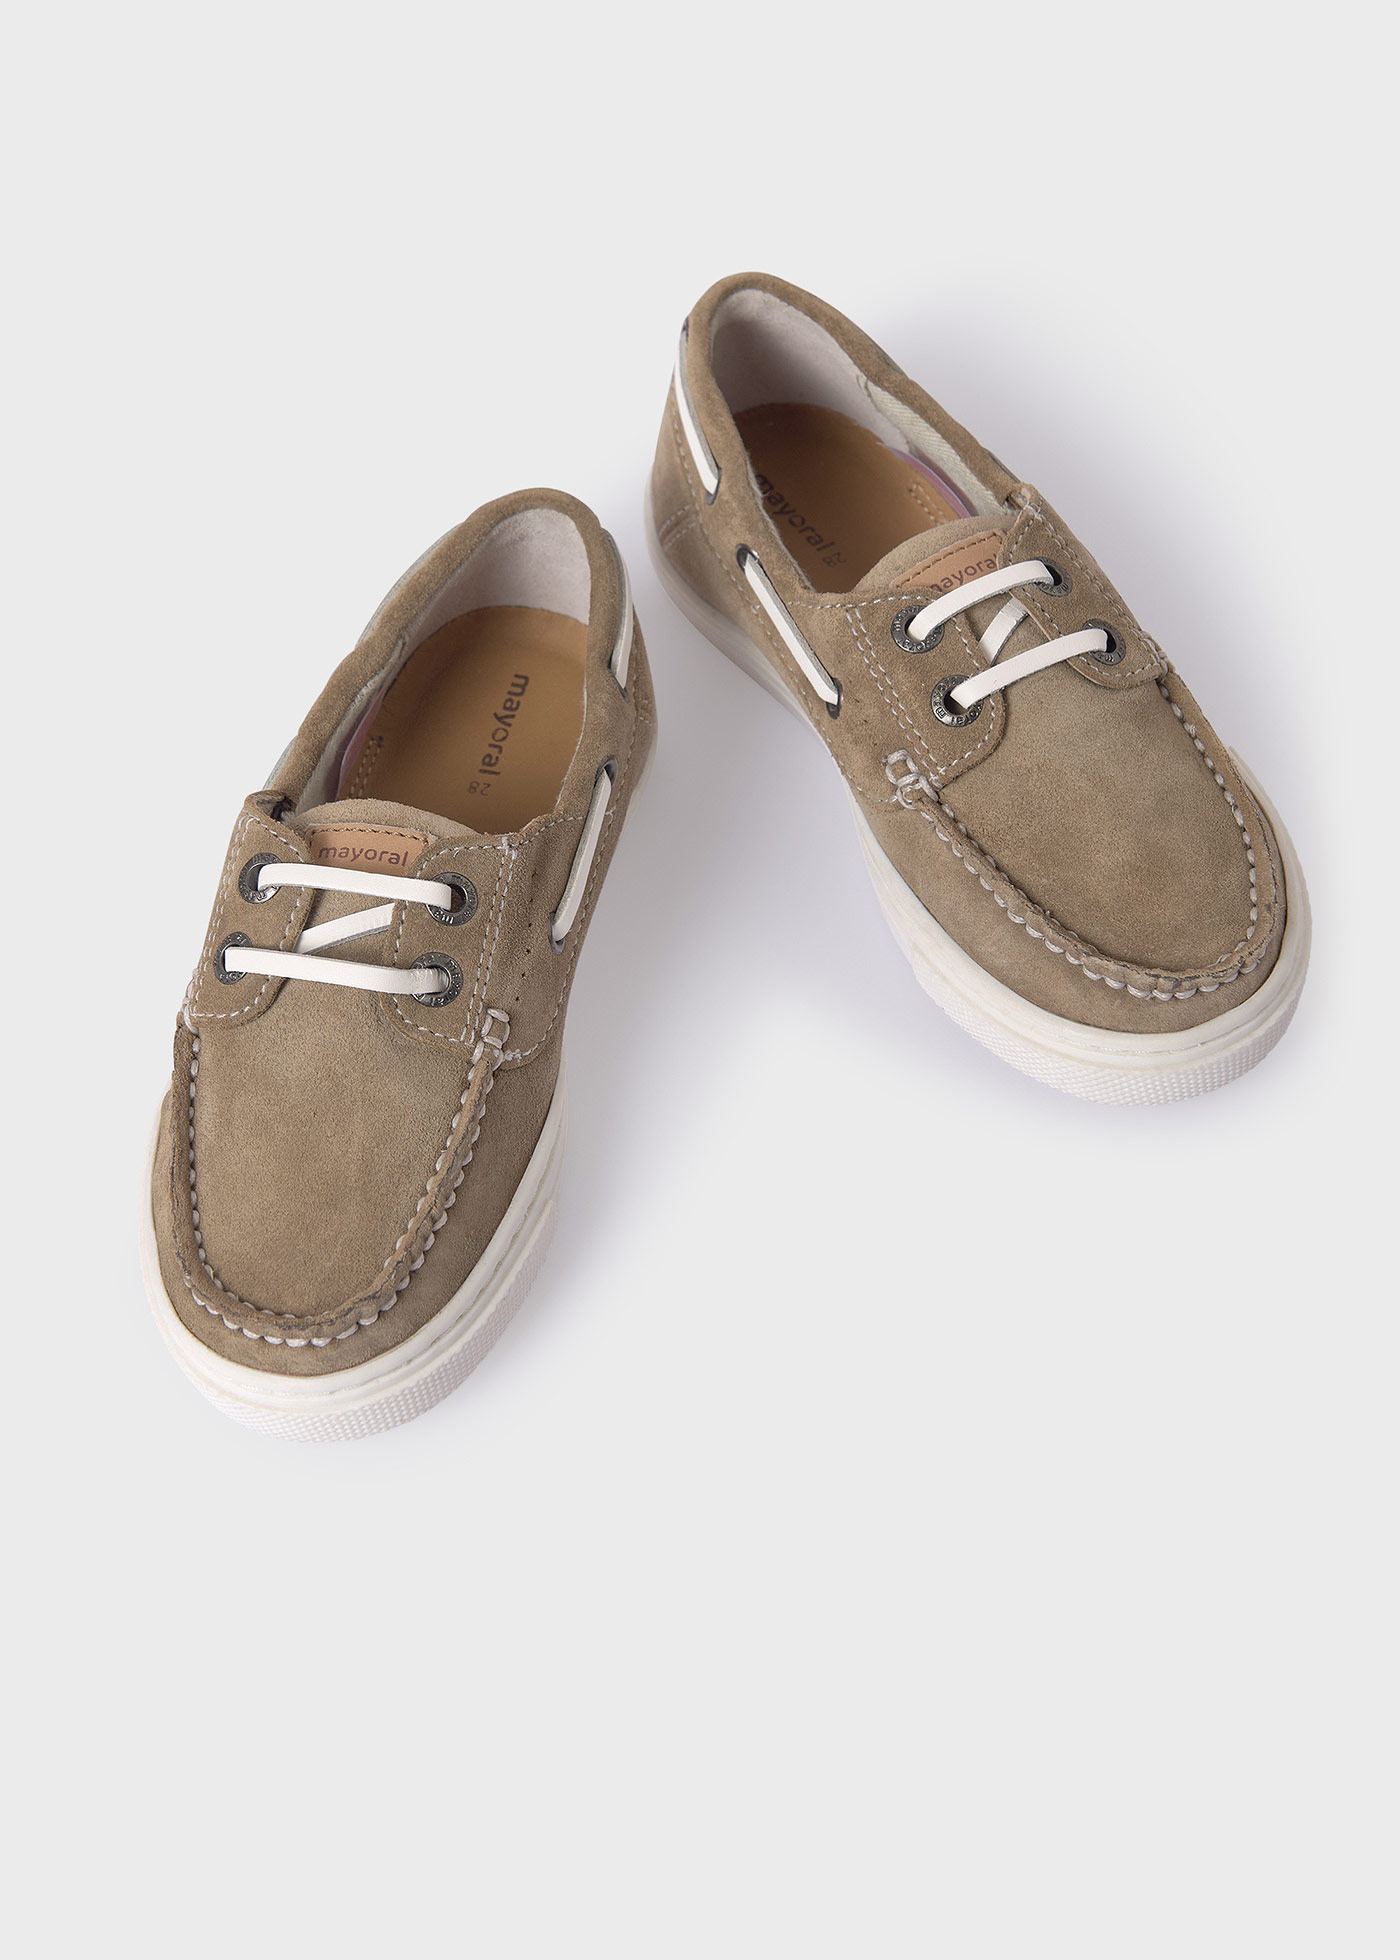 Boys leather boat shoes sustainable leather